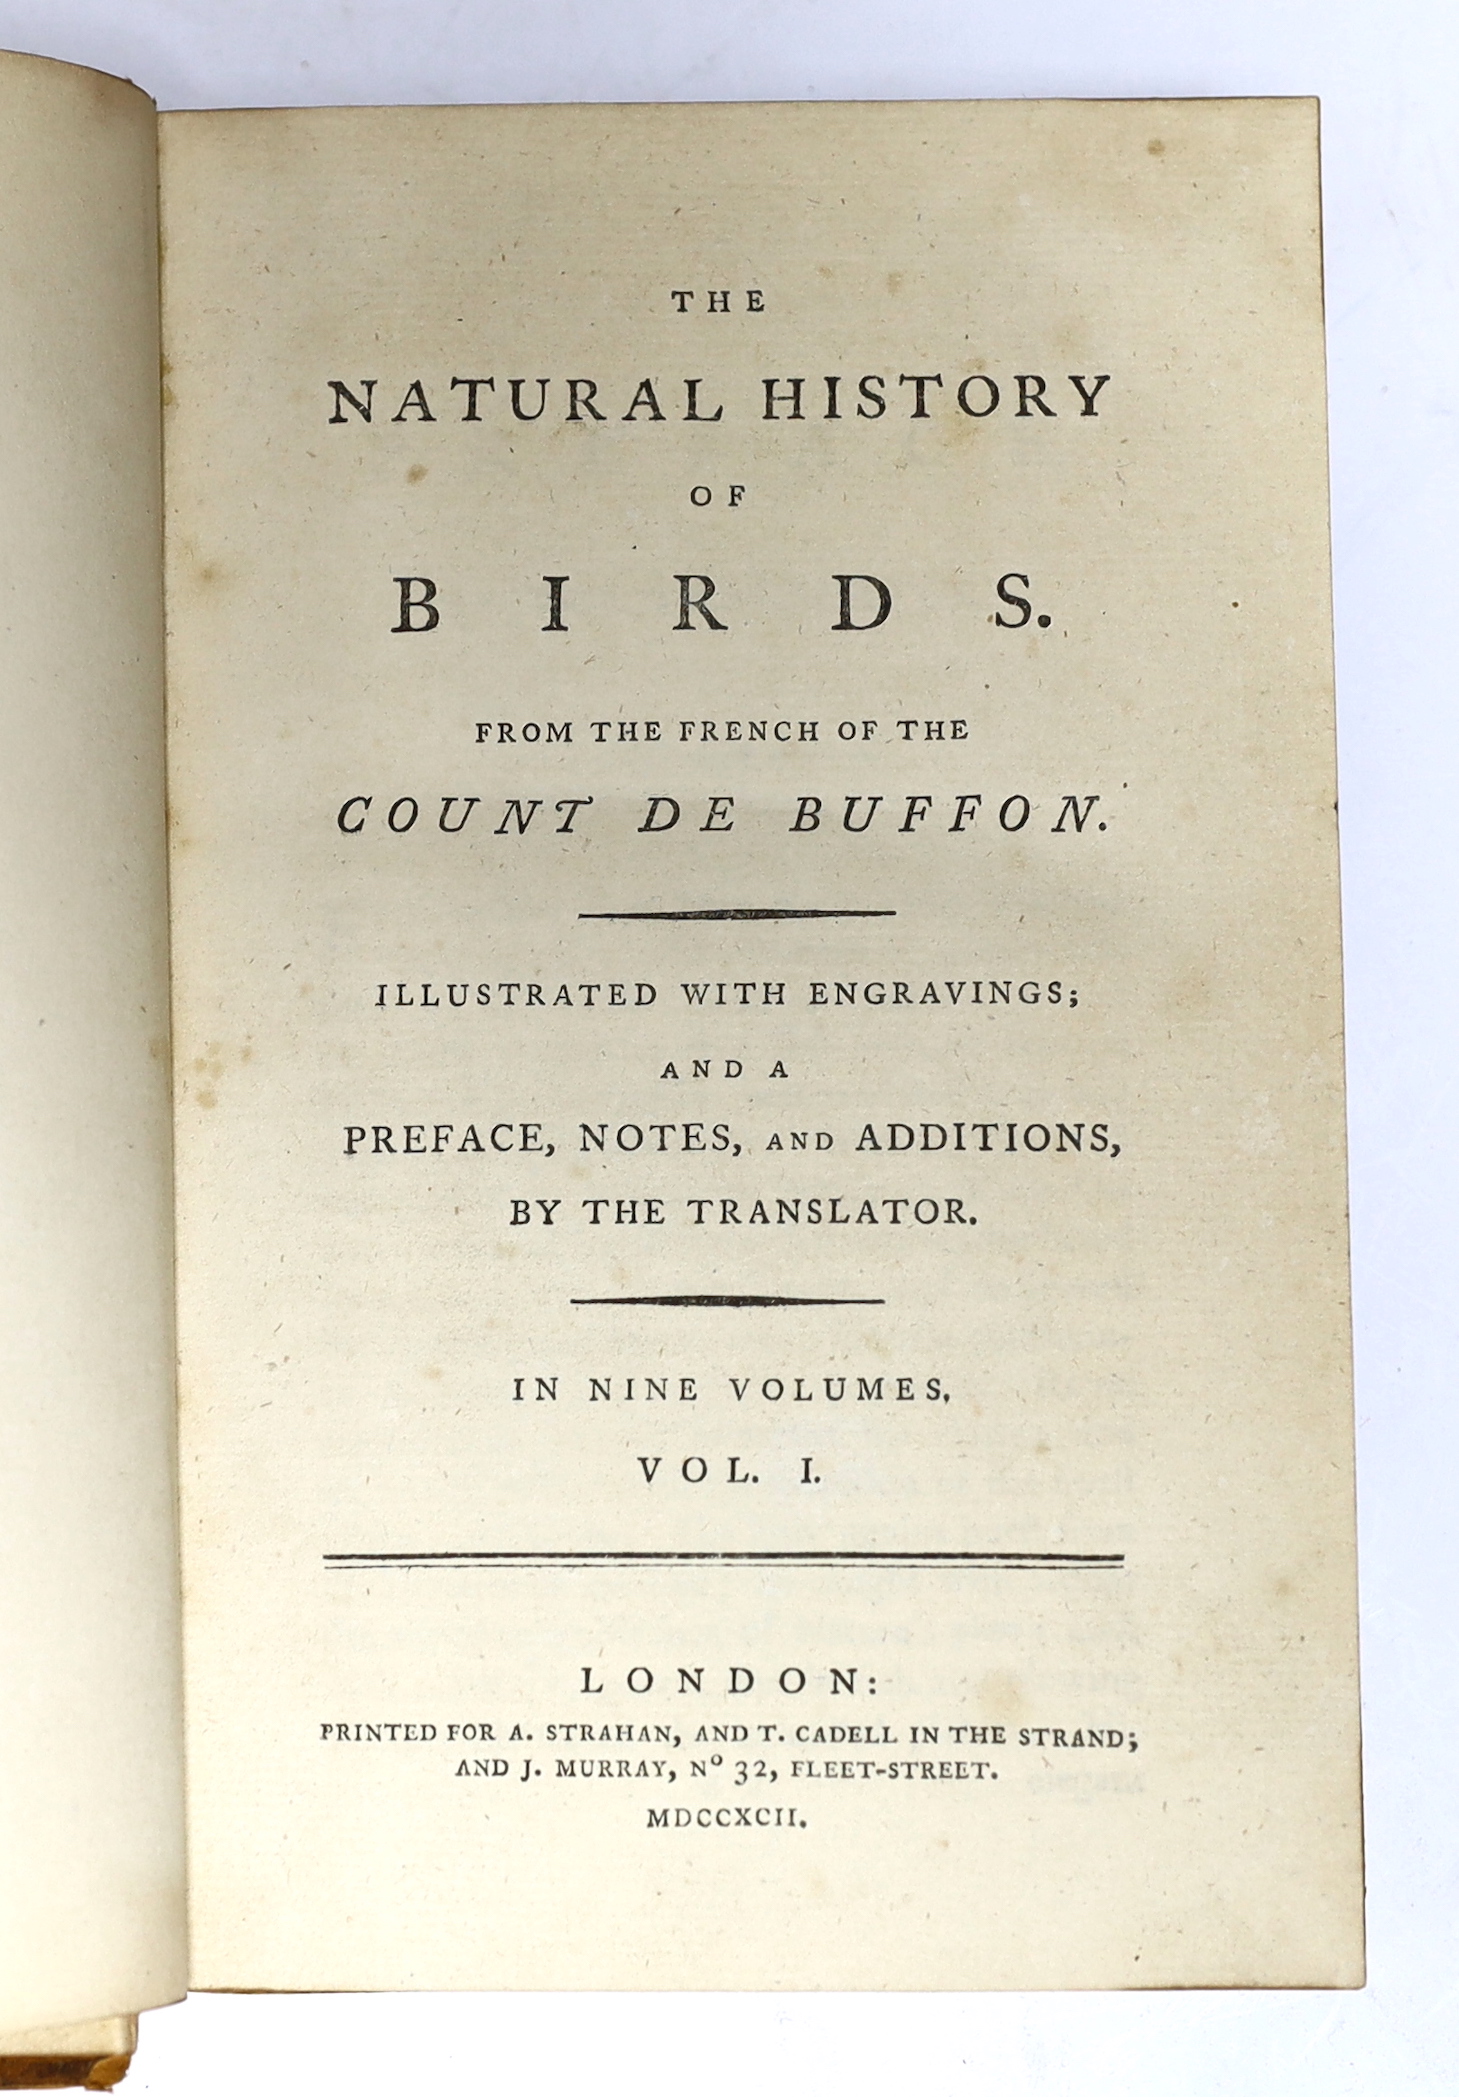 Buffon, George-Louis Leclerc, Comte de - The Natural History of Birds from the French of the Count de Buffon: illustrated with engravings; and a preface, notes, and additions by the translator [William Smellie], 6 vols.